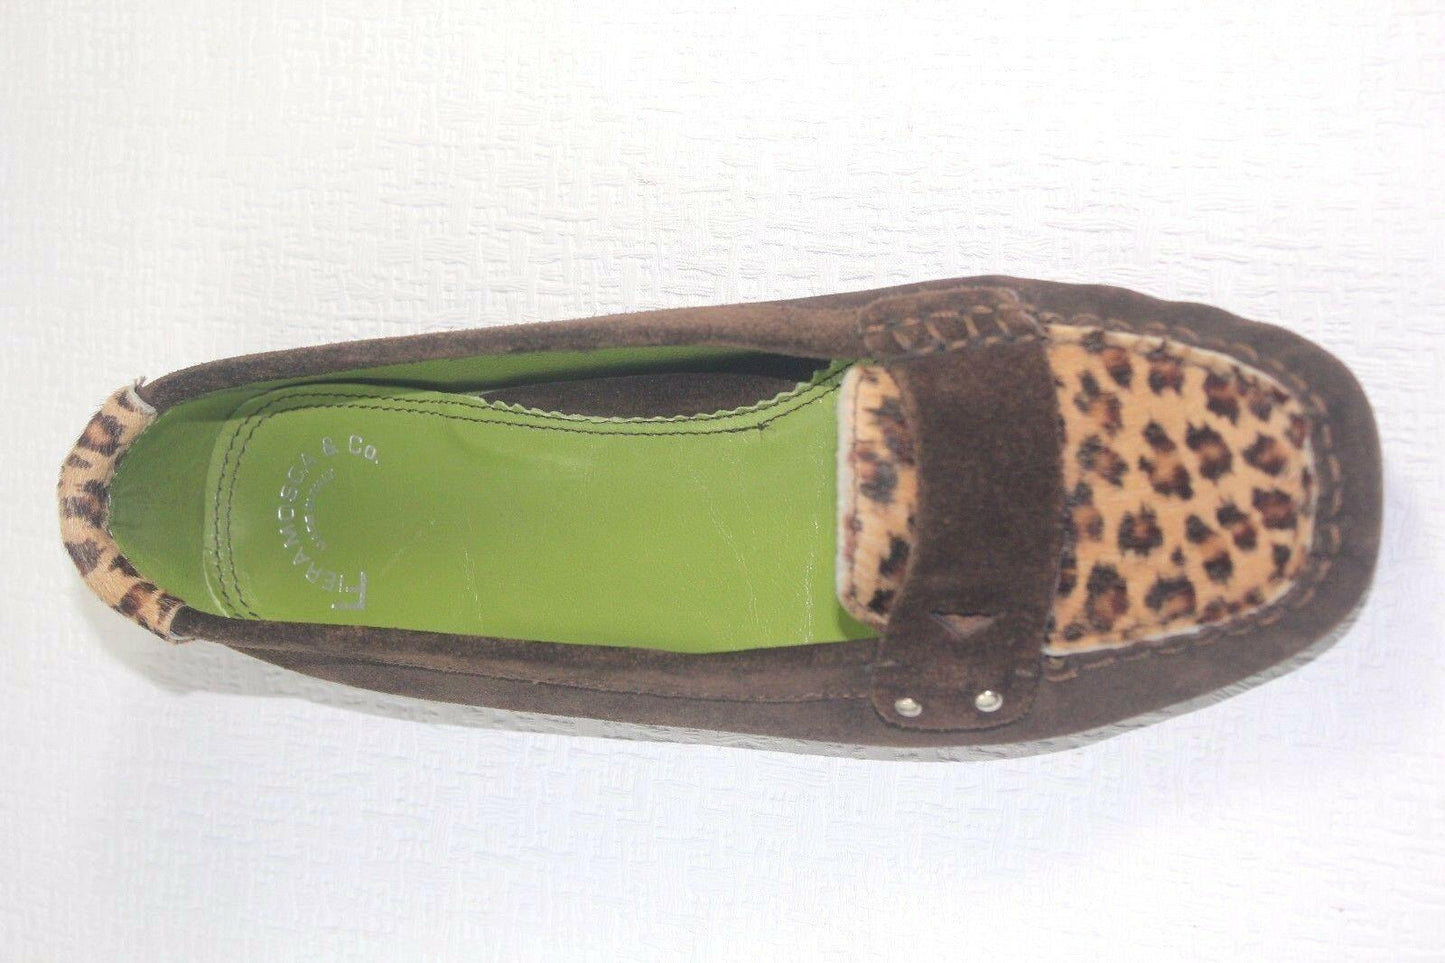 Fieramosca & Co Suede Leopard Calf Hair Moccasin Loafer Flat Women Shoes Sz 5.5 - SVNYFancy